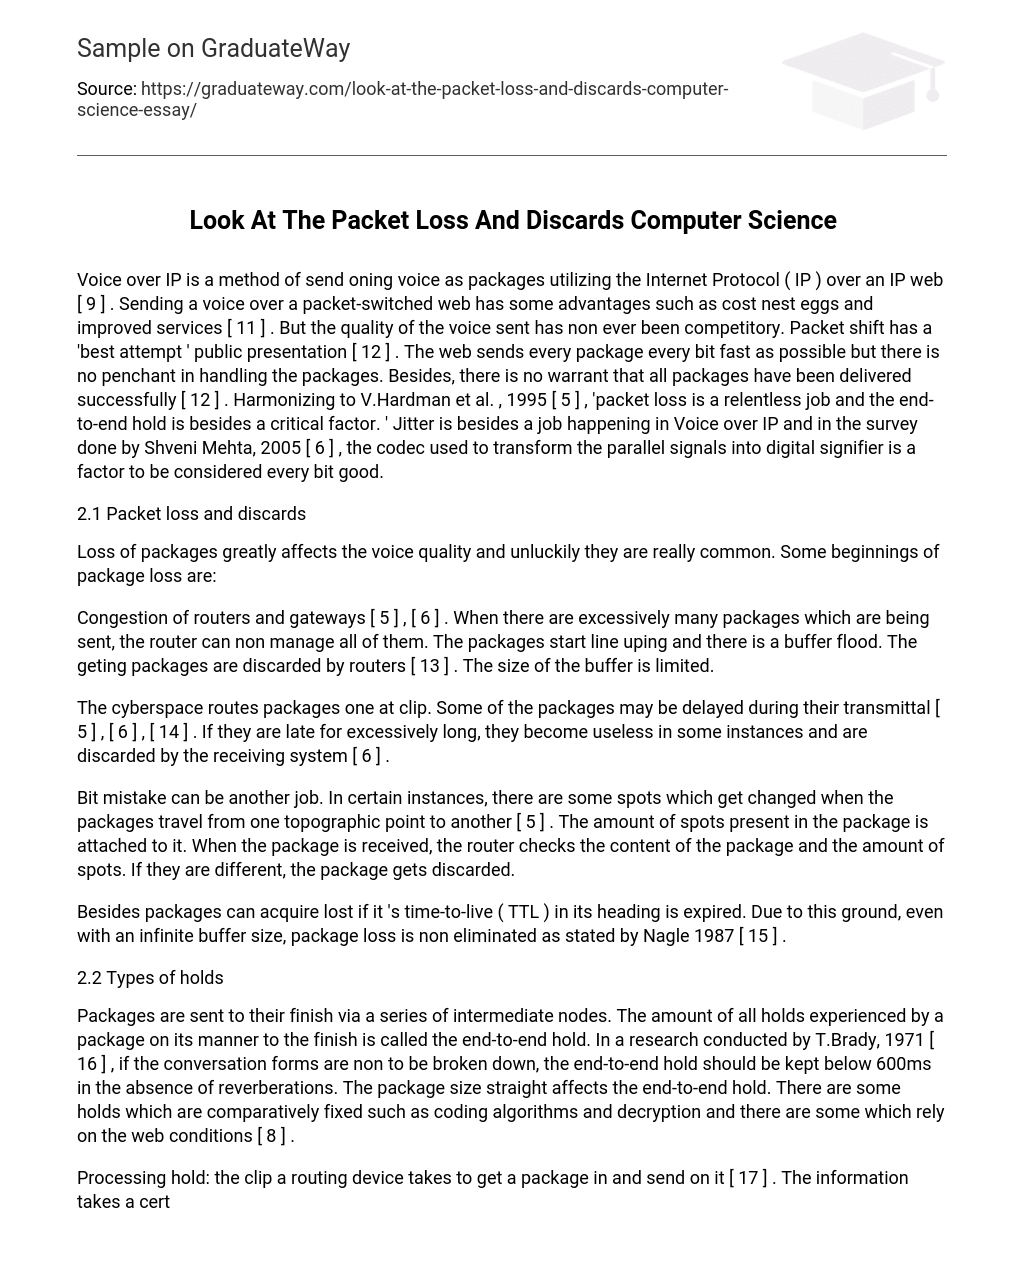 Look At The Packet Loss And Discards Computer Science